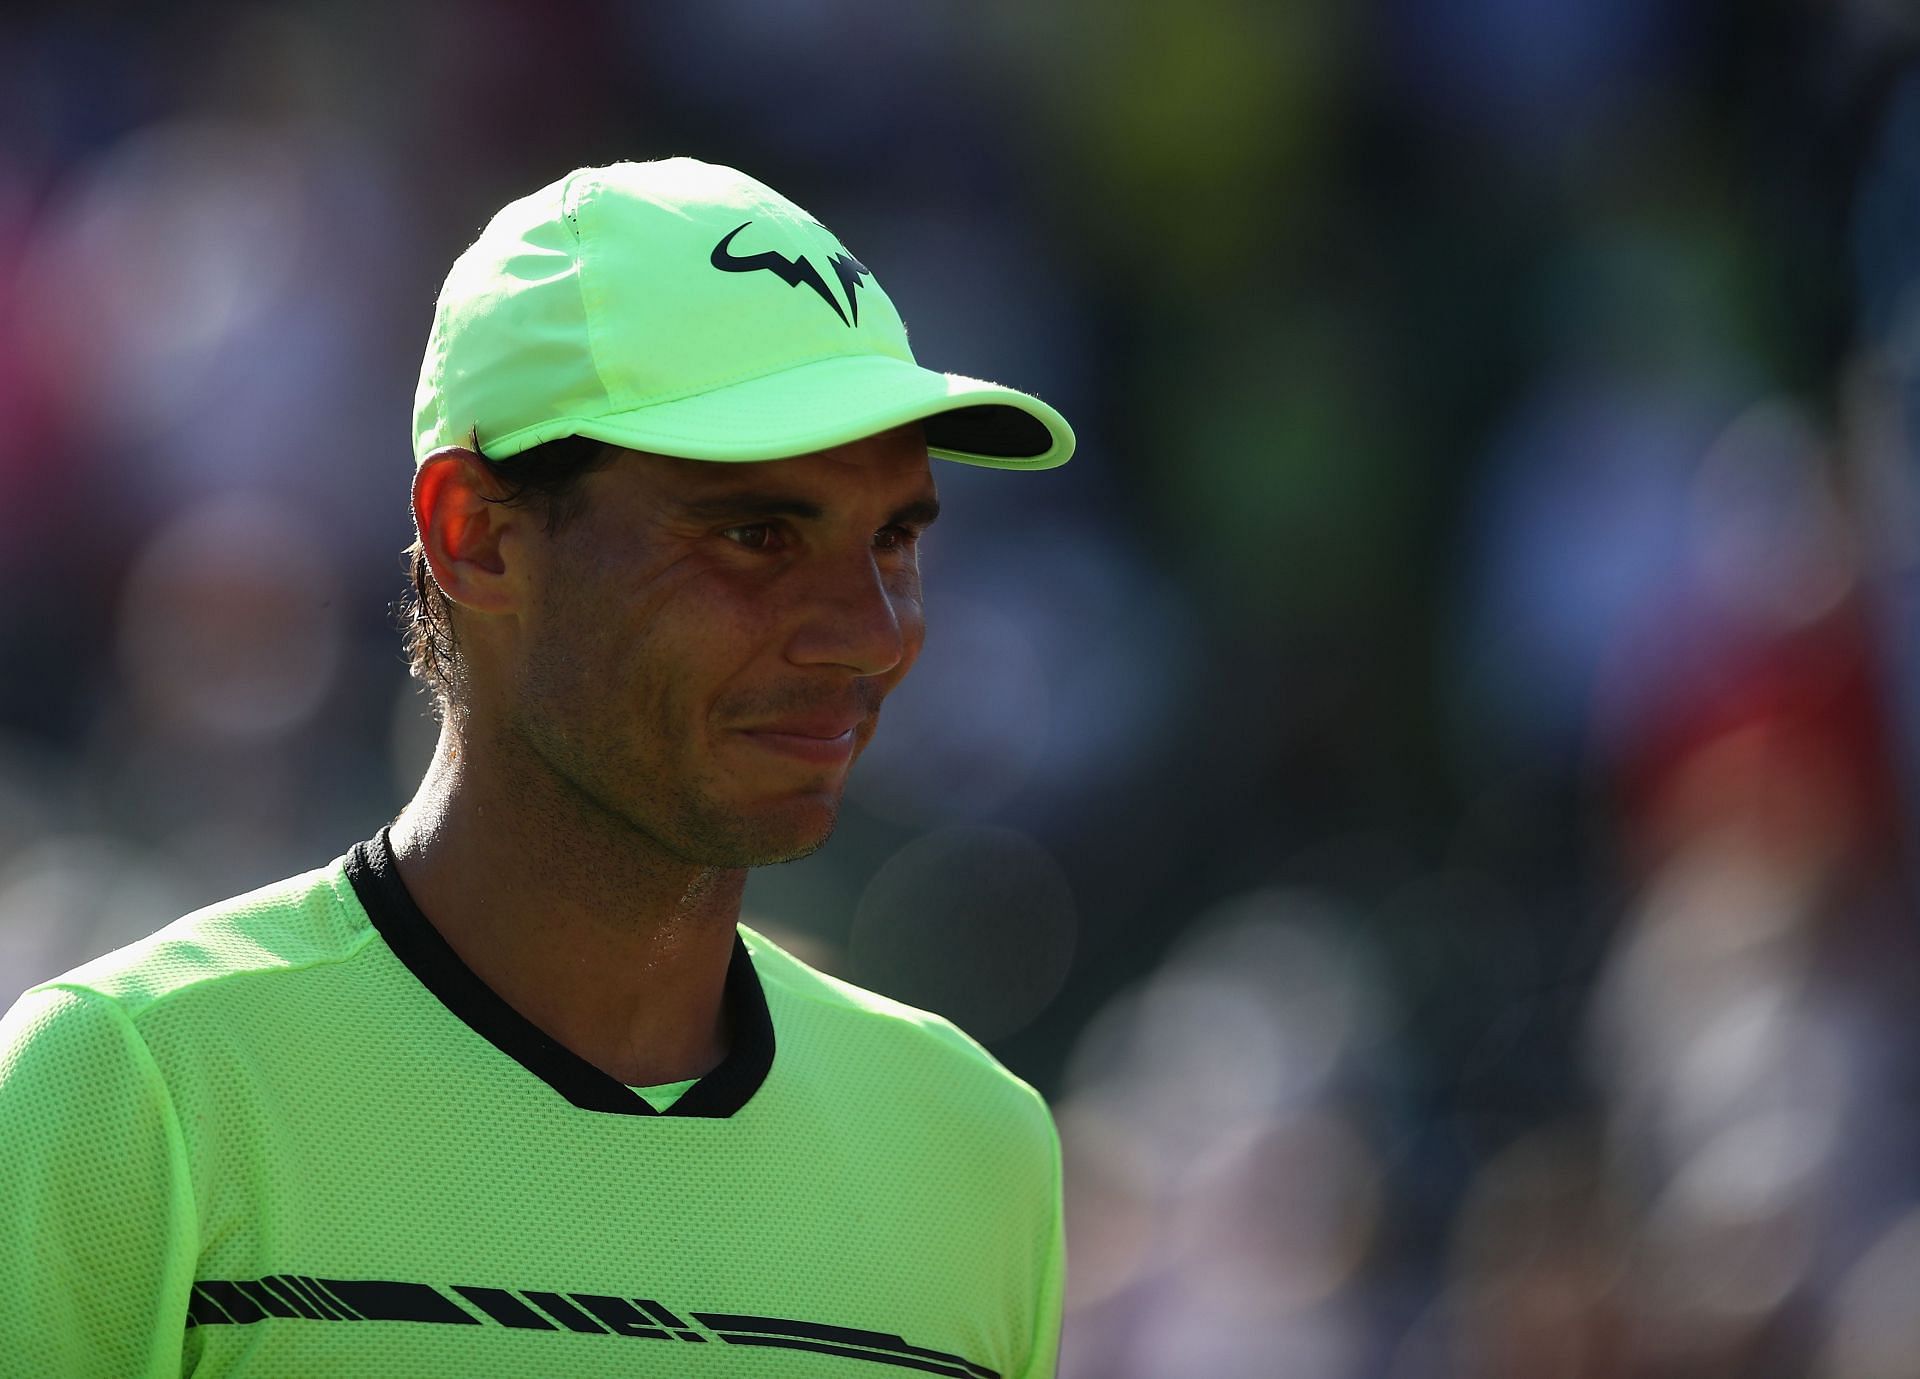 The Miami Masters is one of two Masters events that Rafael Nadal has never won